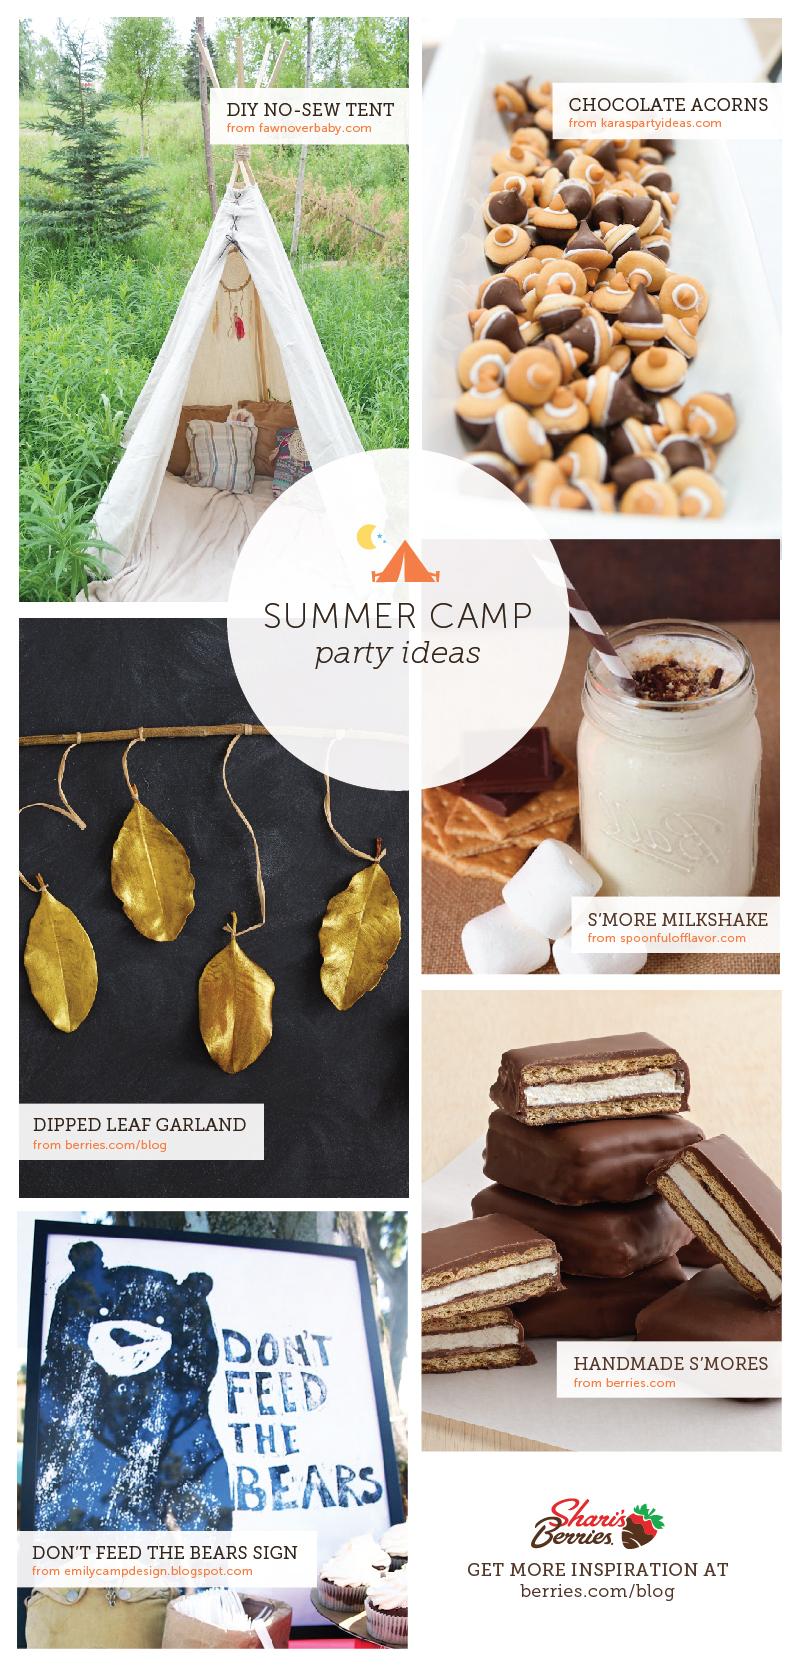 Summer Party Theme: Camp Out